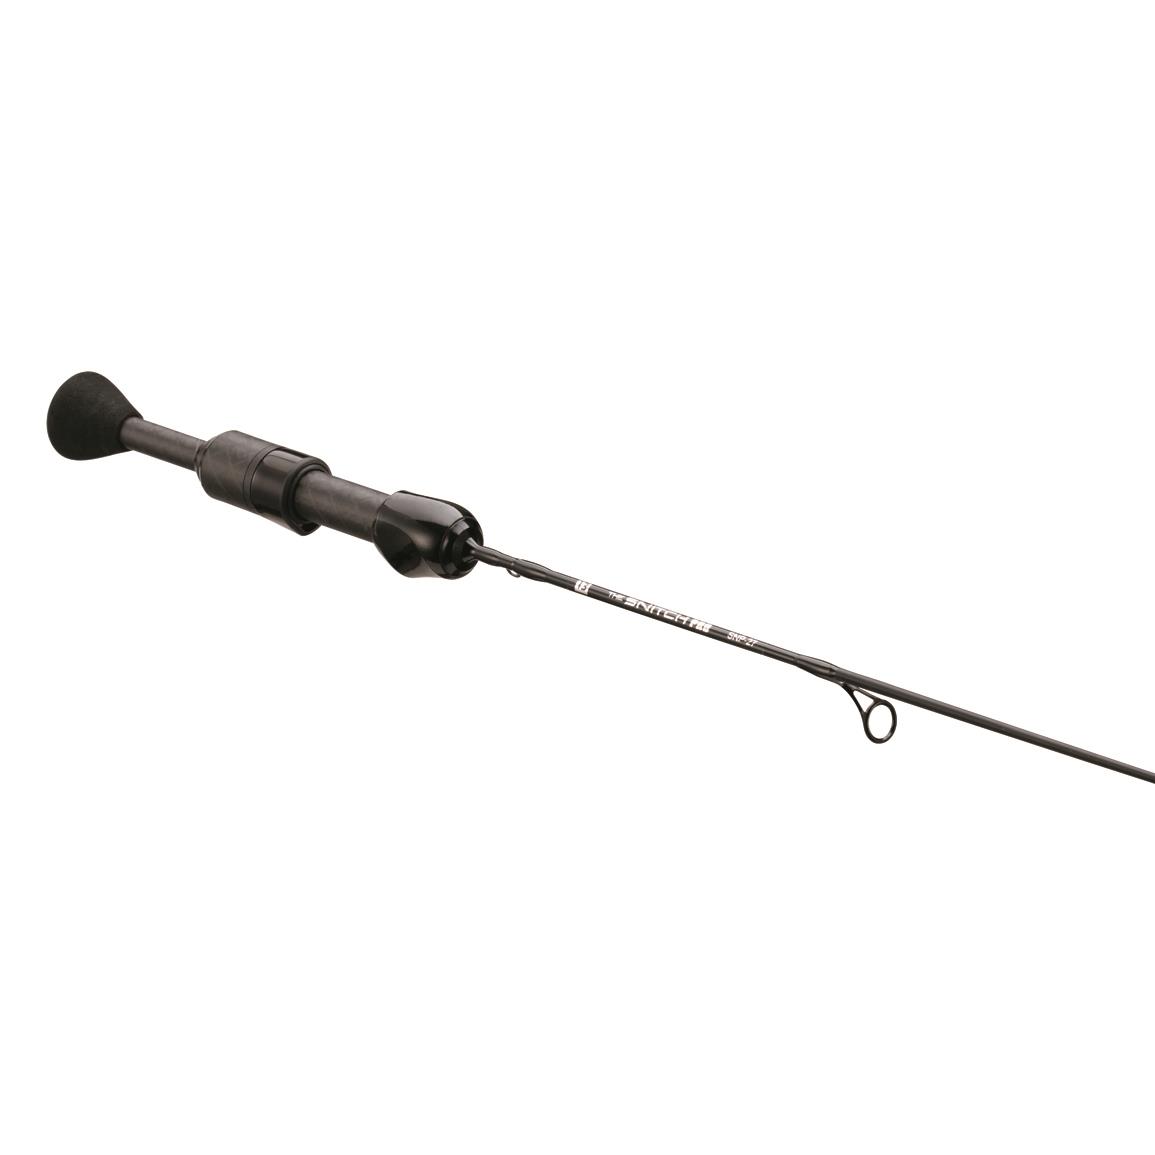 St. Croix Tundra Ice Fishing Rod, 36l., Medium Heavy Power, Fast Action -  723886, Ice Fishing Rods at Sportsman's Guide